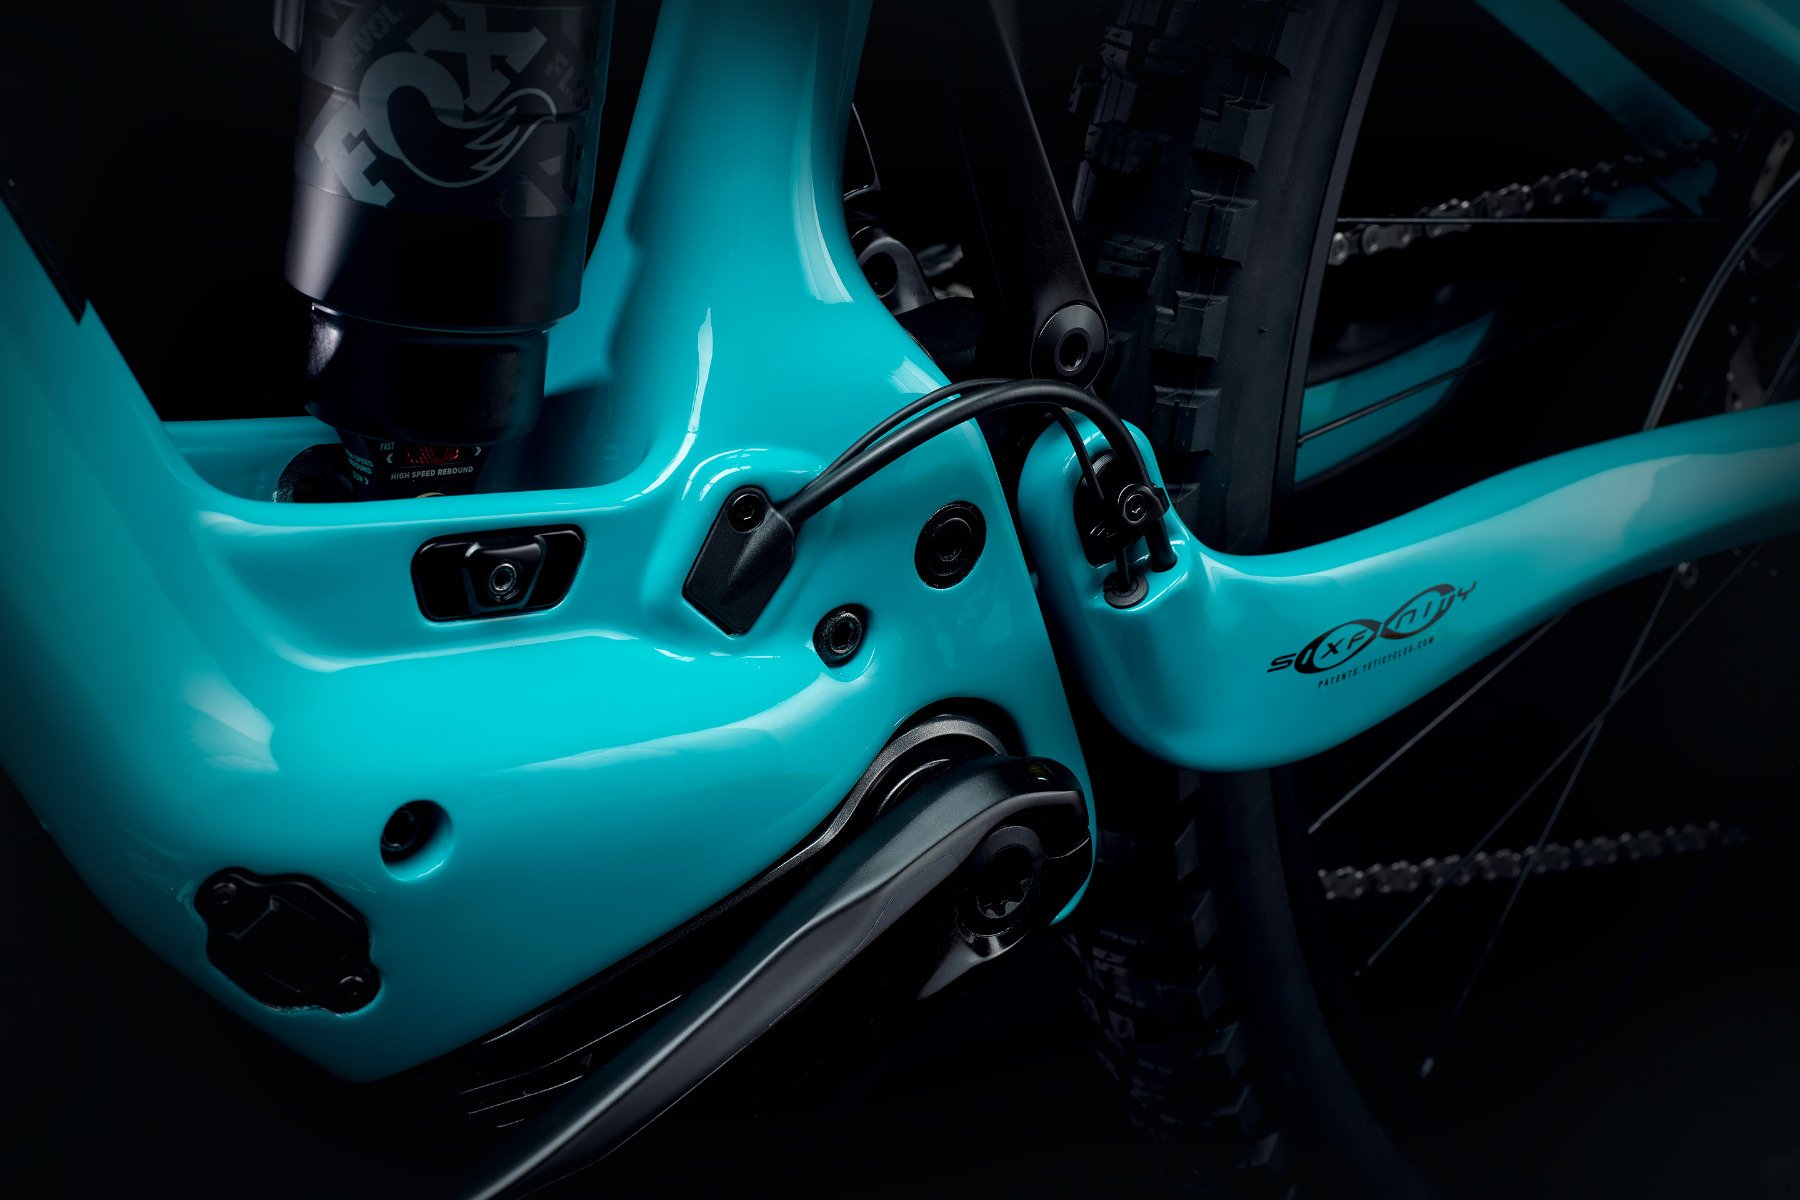 2022_yeticycles_160e_detail_cable_non_drive.jpeg